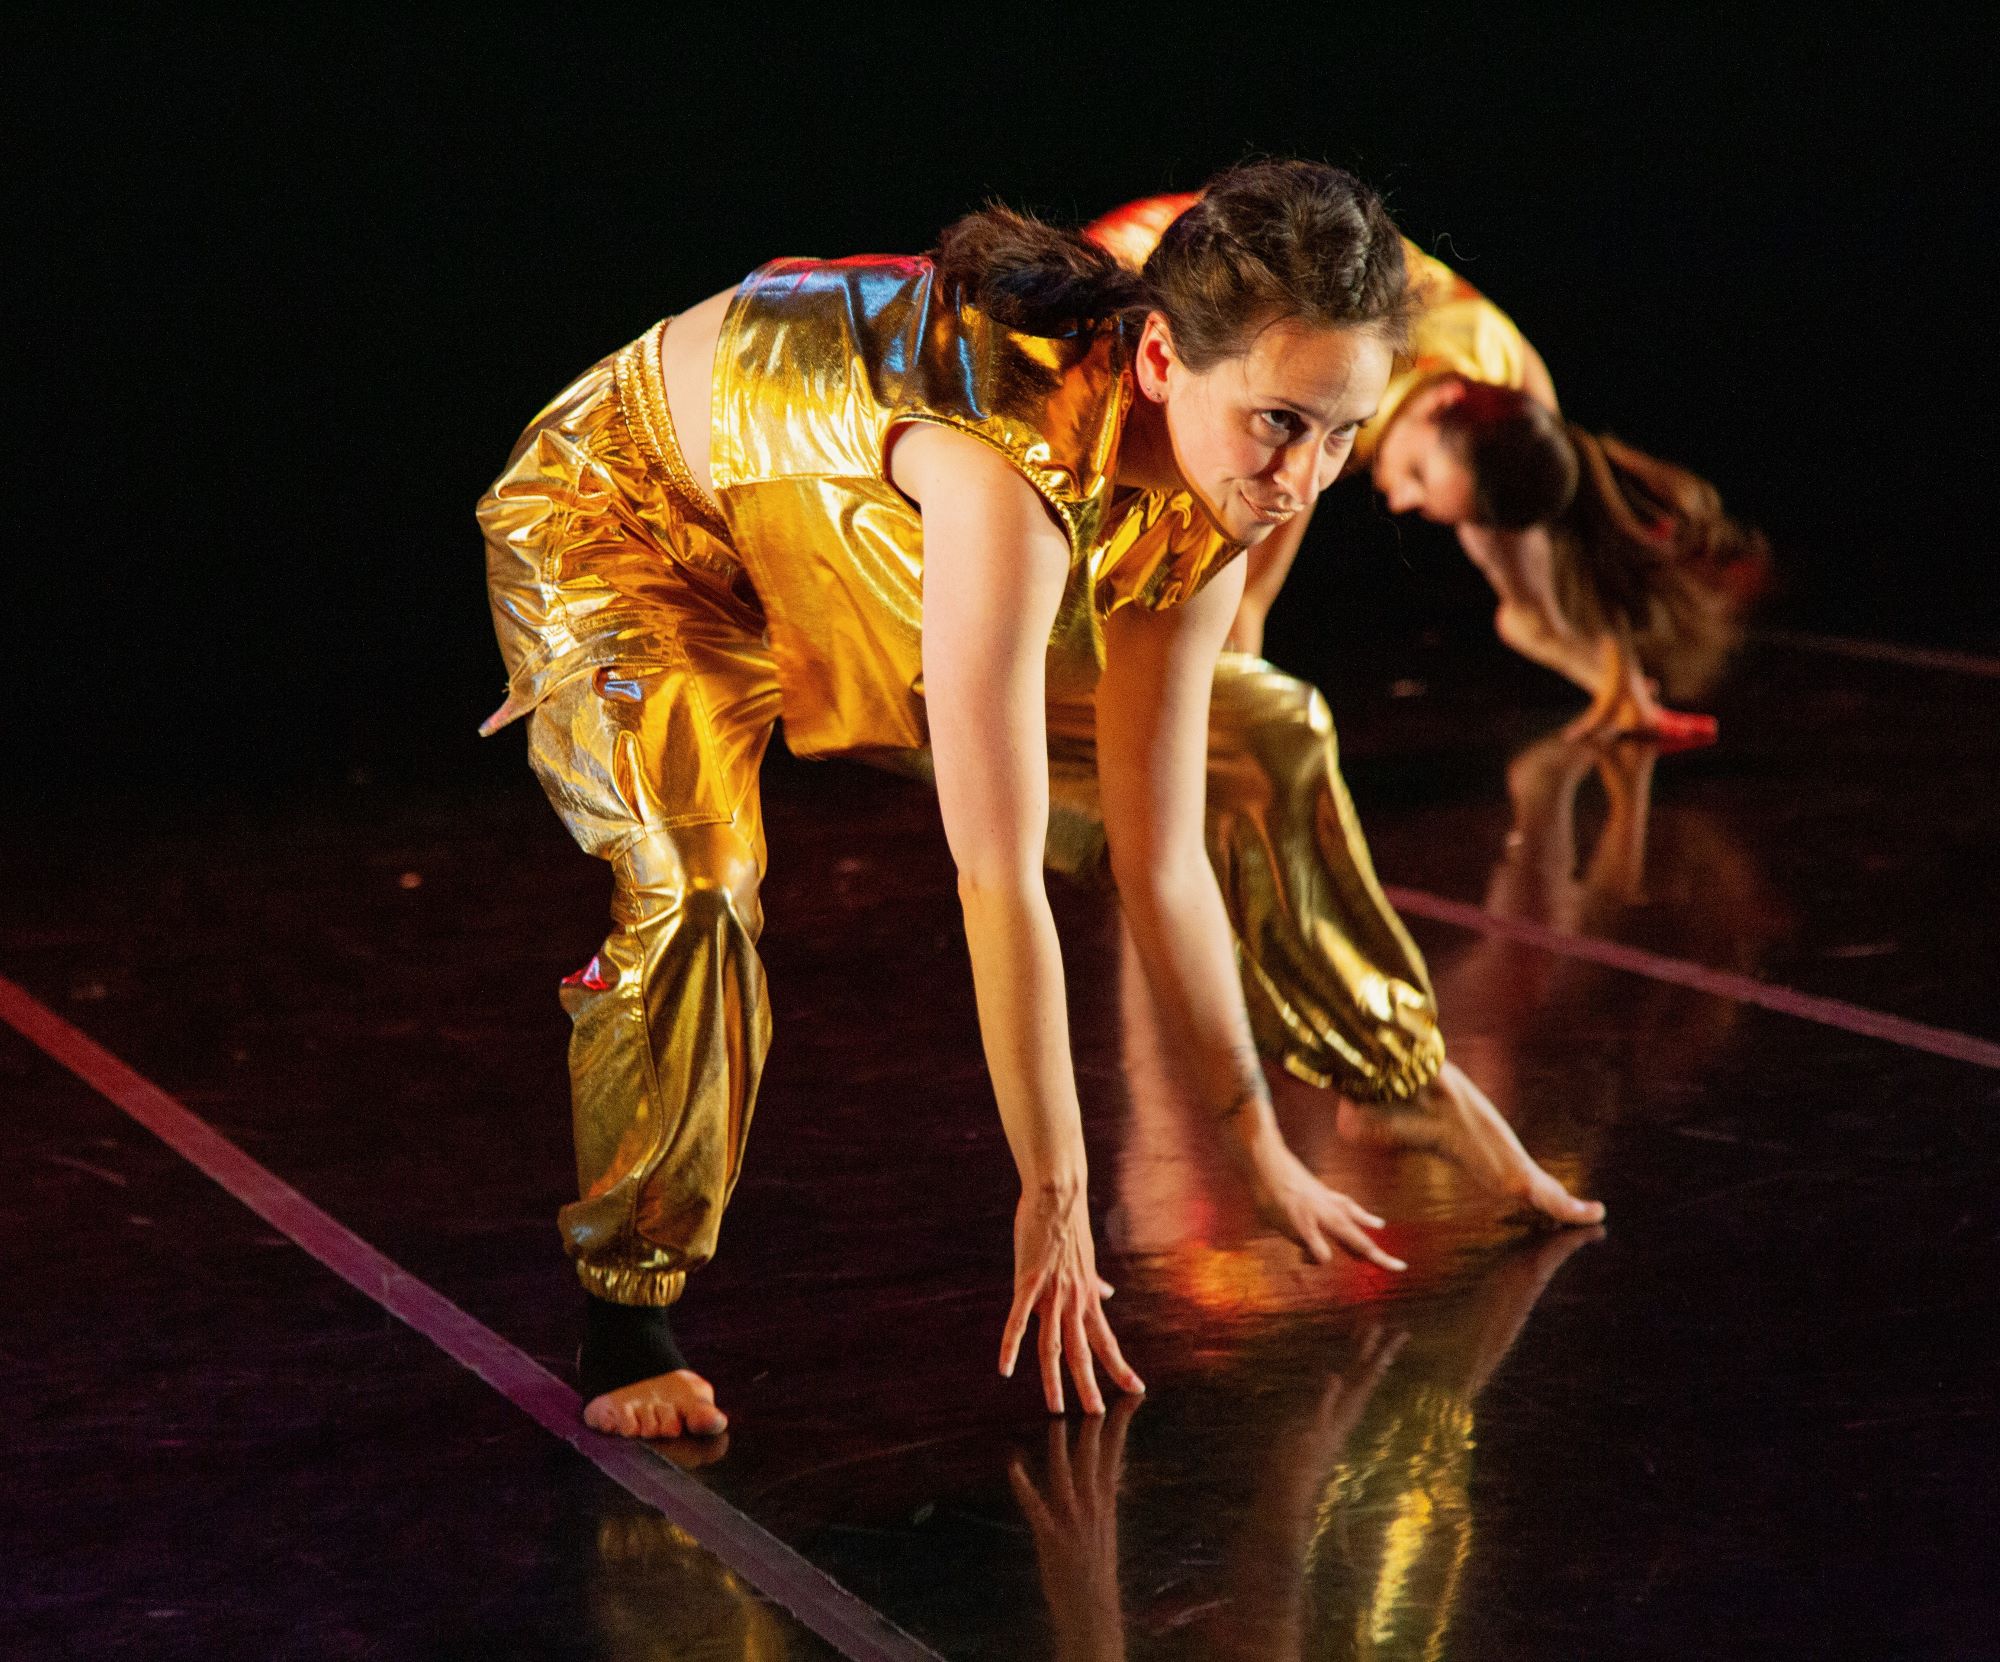 Dancer in gold with dancer behind her